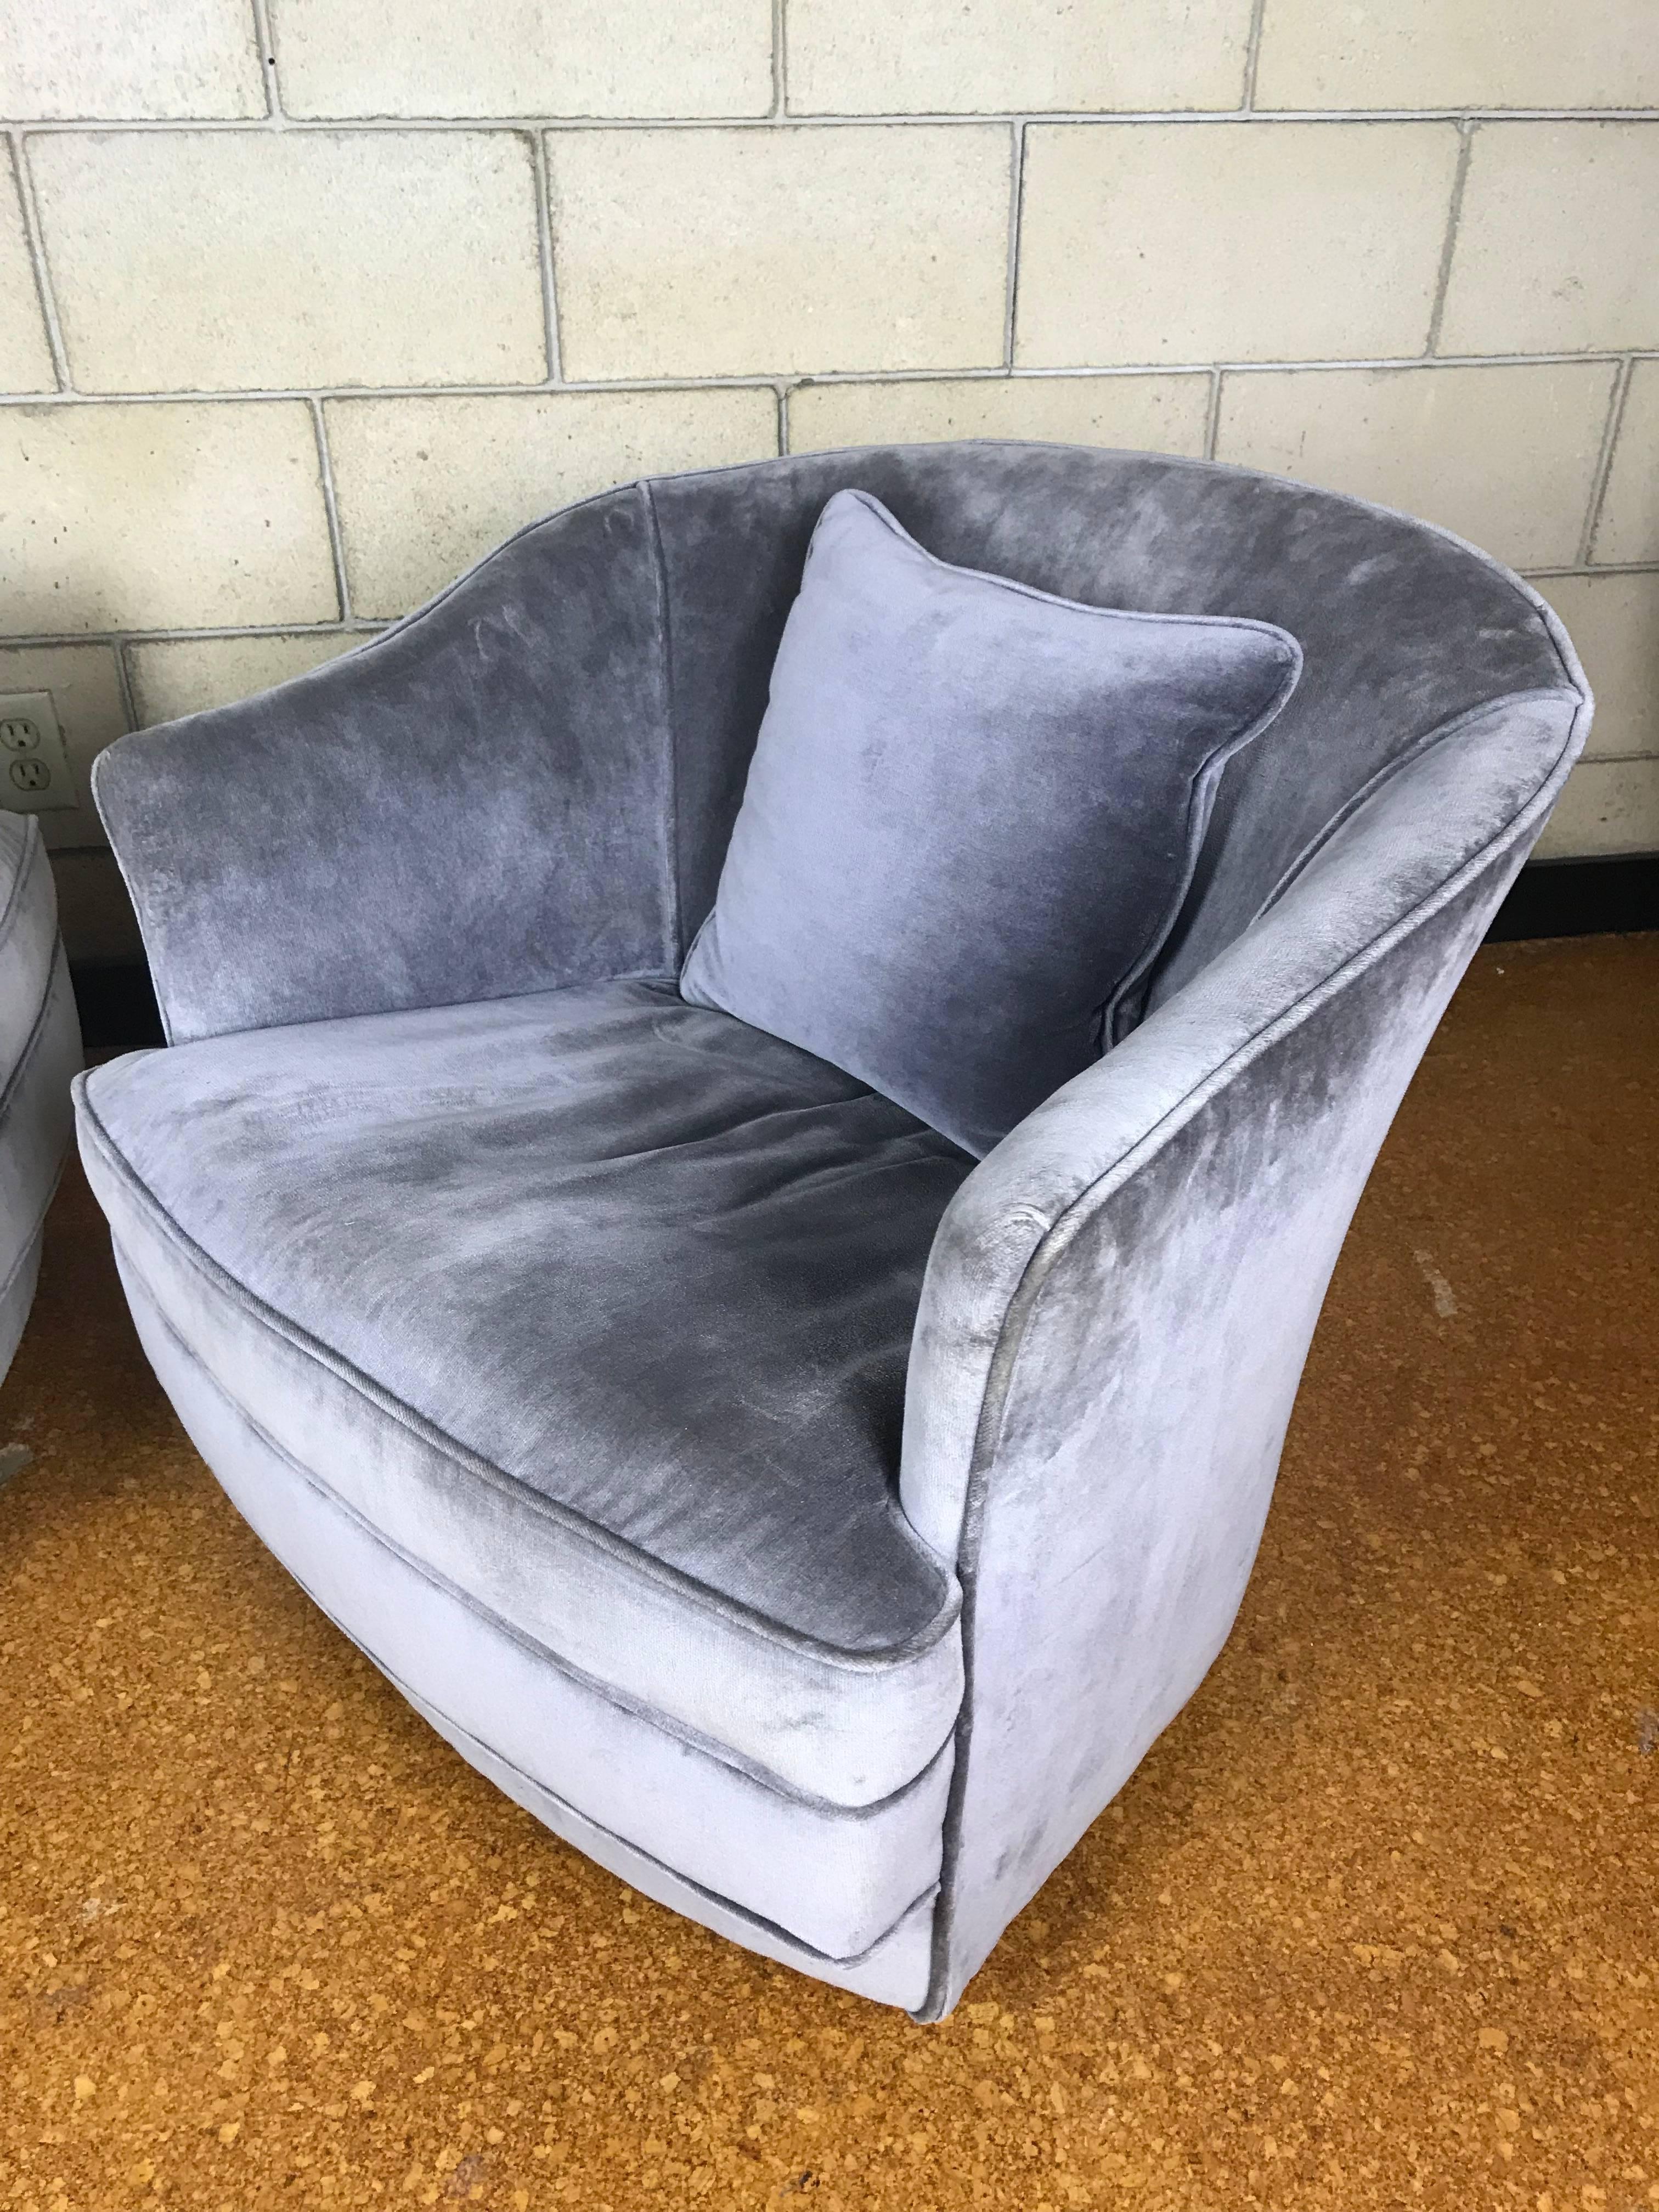 Rare pair of petite swivel club chairs in soft grey felt by Ralph Morse for the Ralph Morse Furniture Company. Each chair is on casters and they move silently and smooth. The original labels are under each chair - dated 11/12/1964. They were